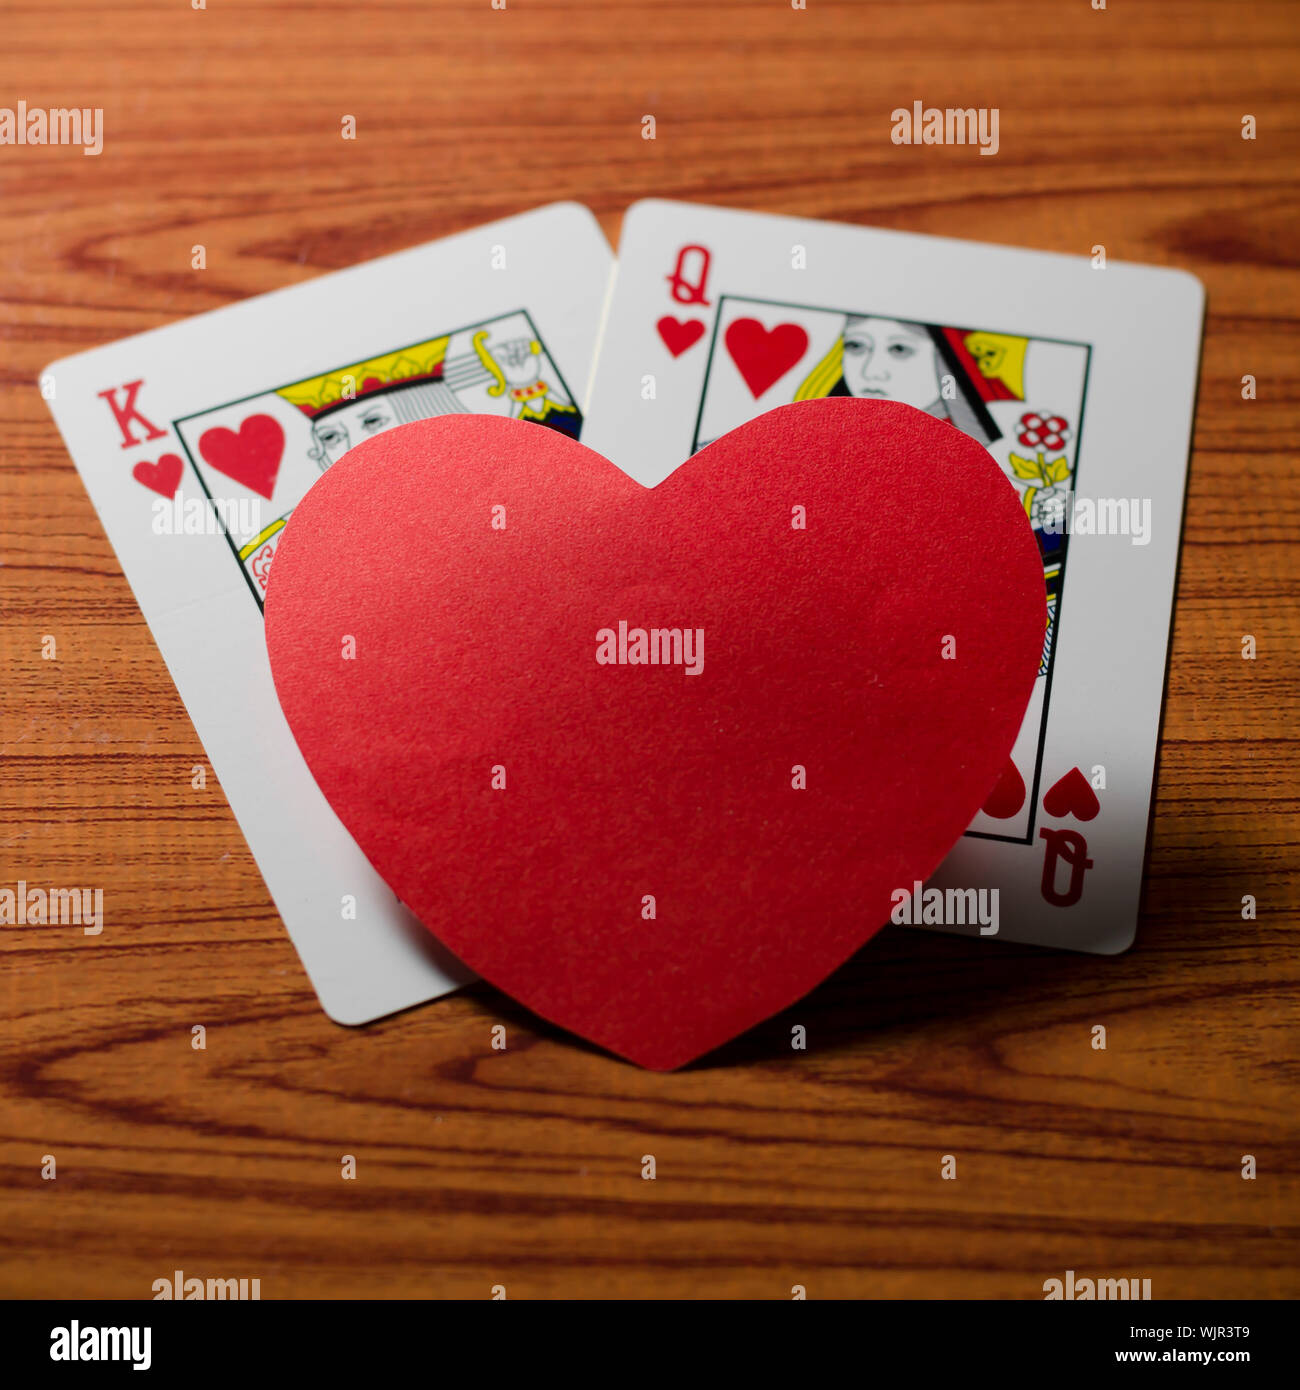 heart and love king queen card on wood background Stock Photo - Alamy